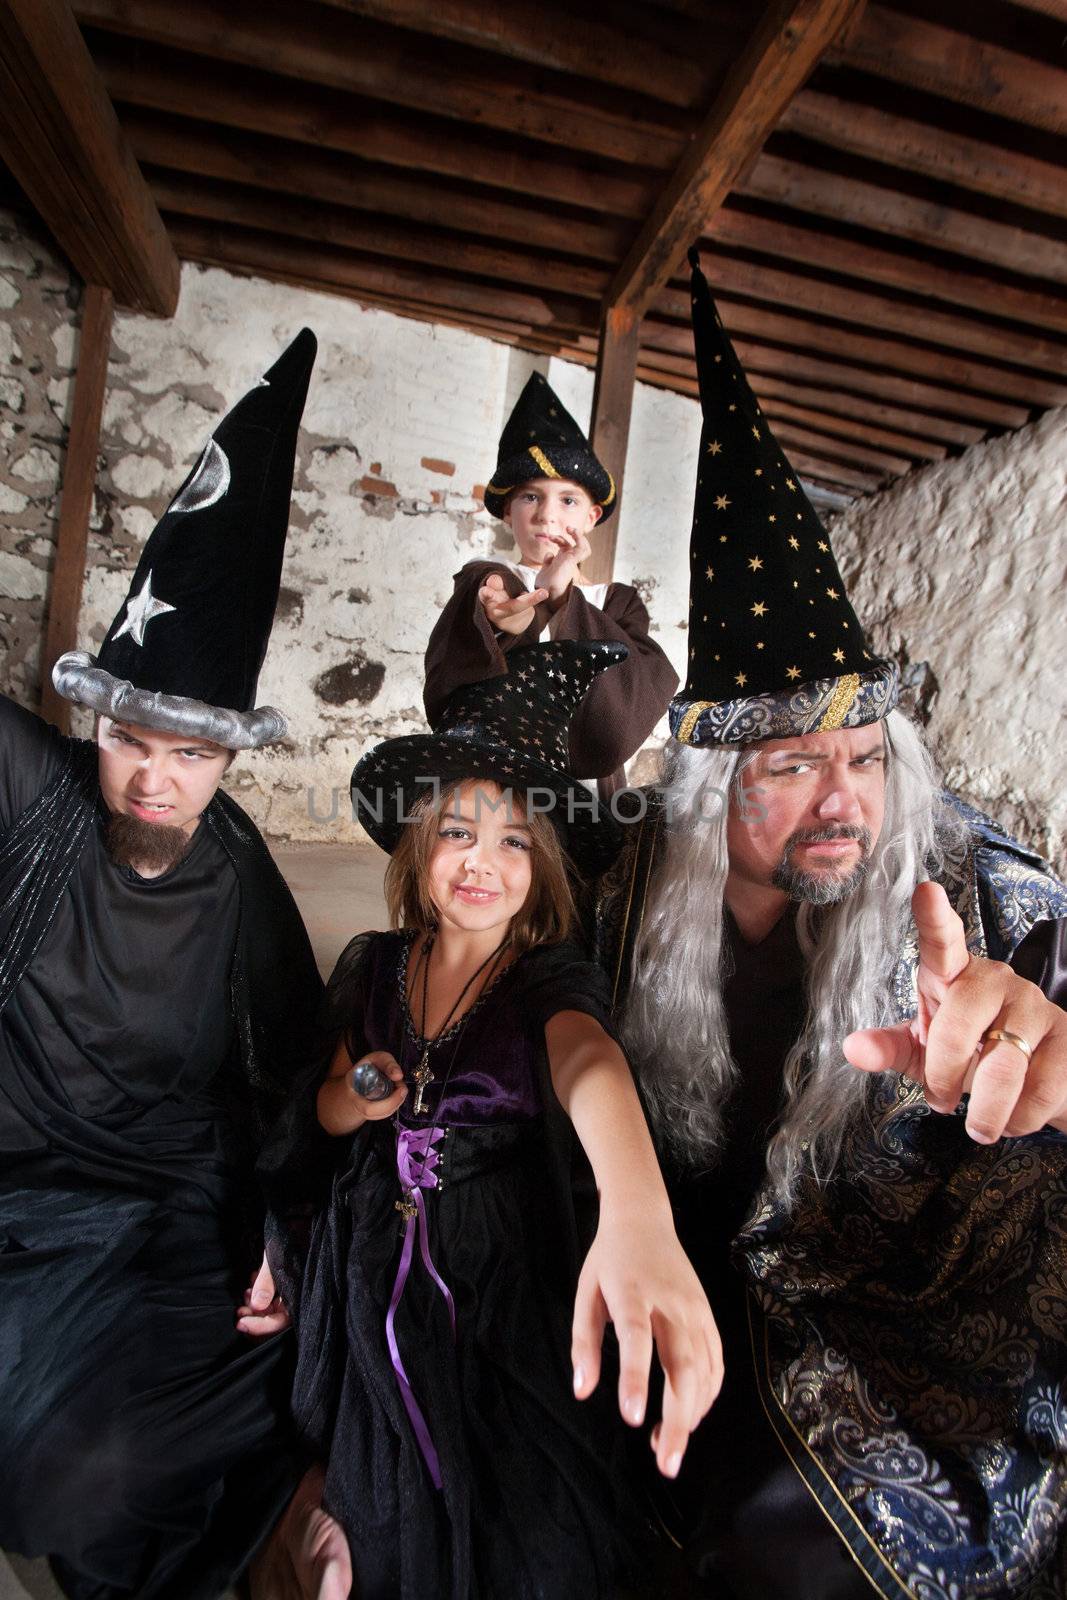 Sister and brother wizards casting spells with their father